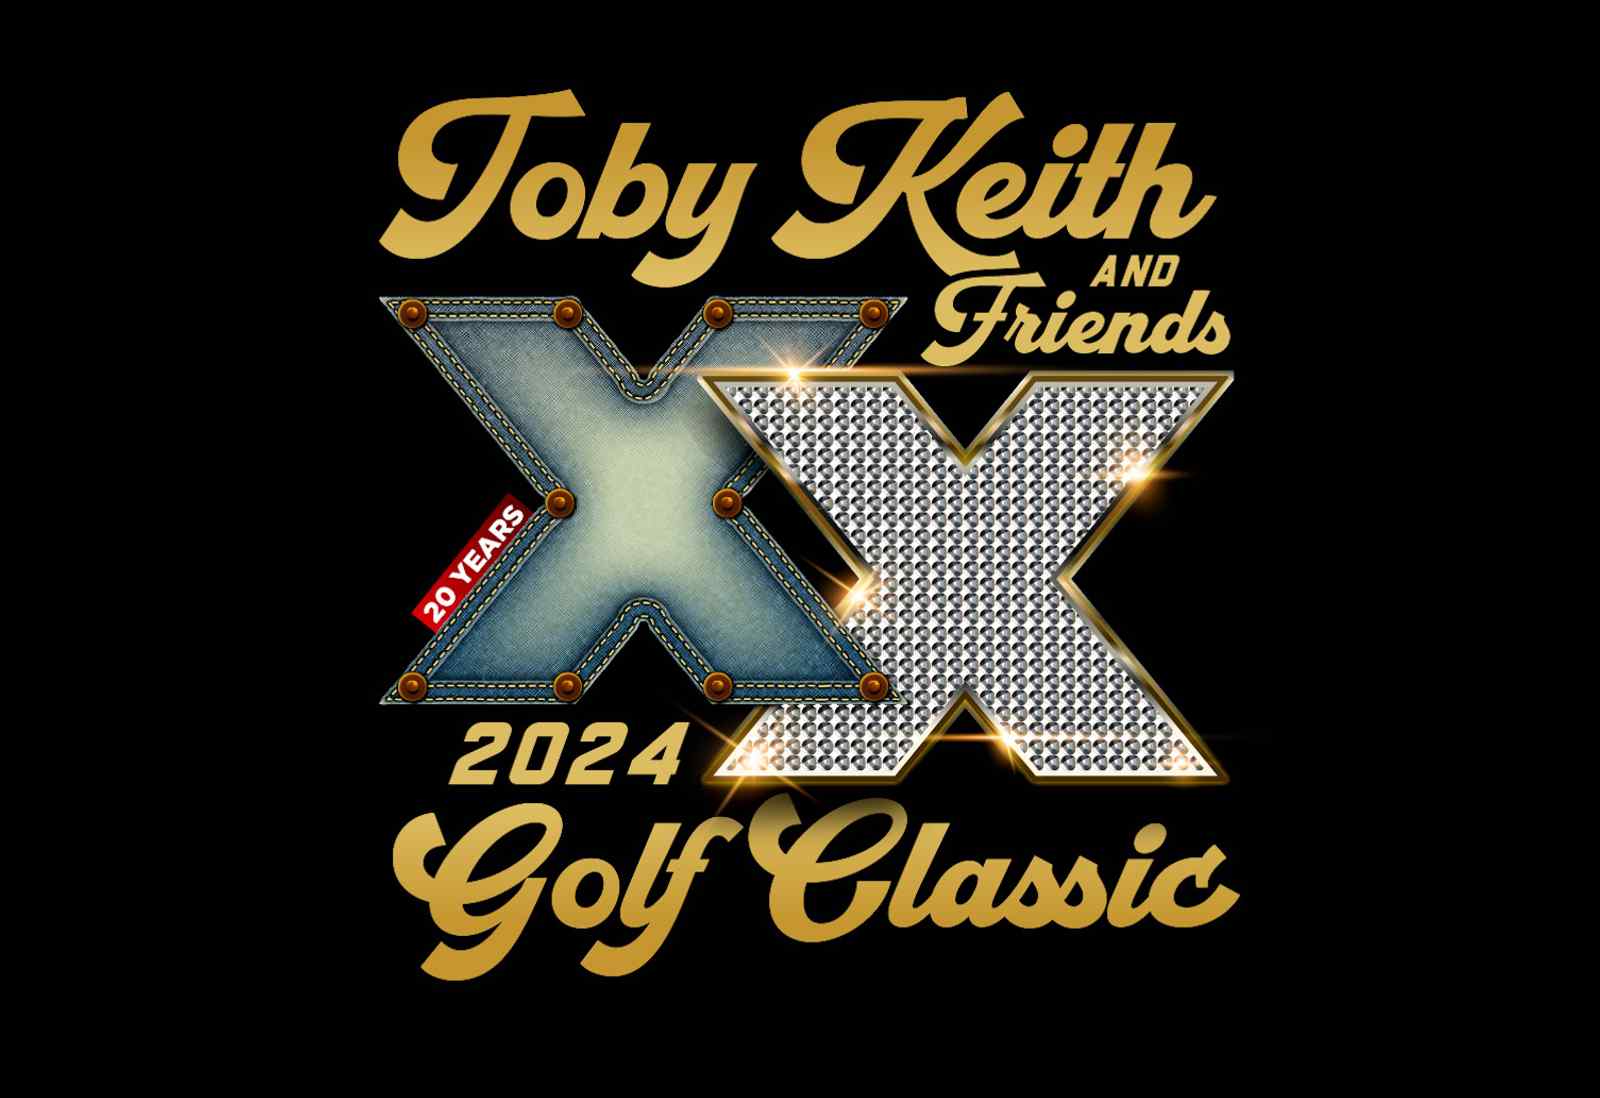 Toby Keith & Friends Golf Classic  Celebrates 20th Anniversary May 31 And June 1